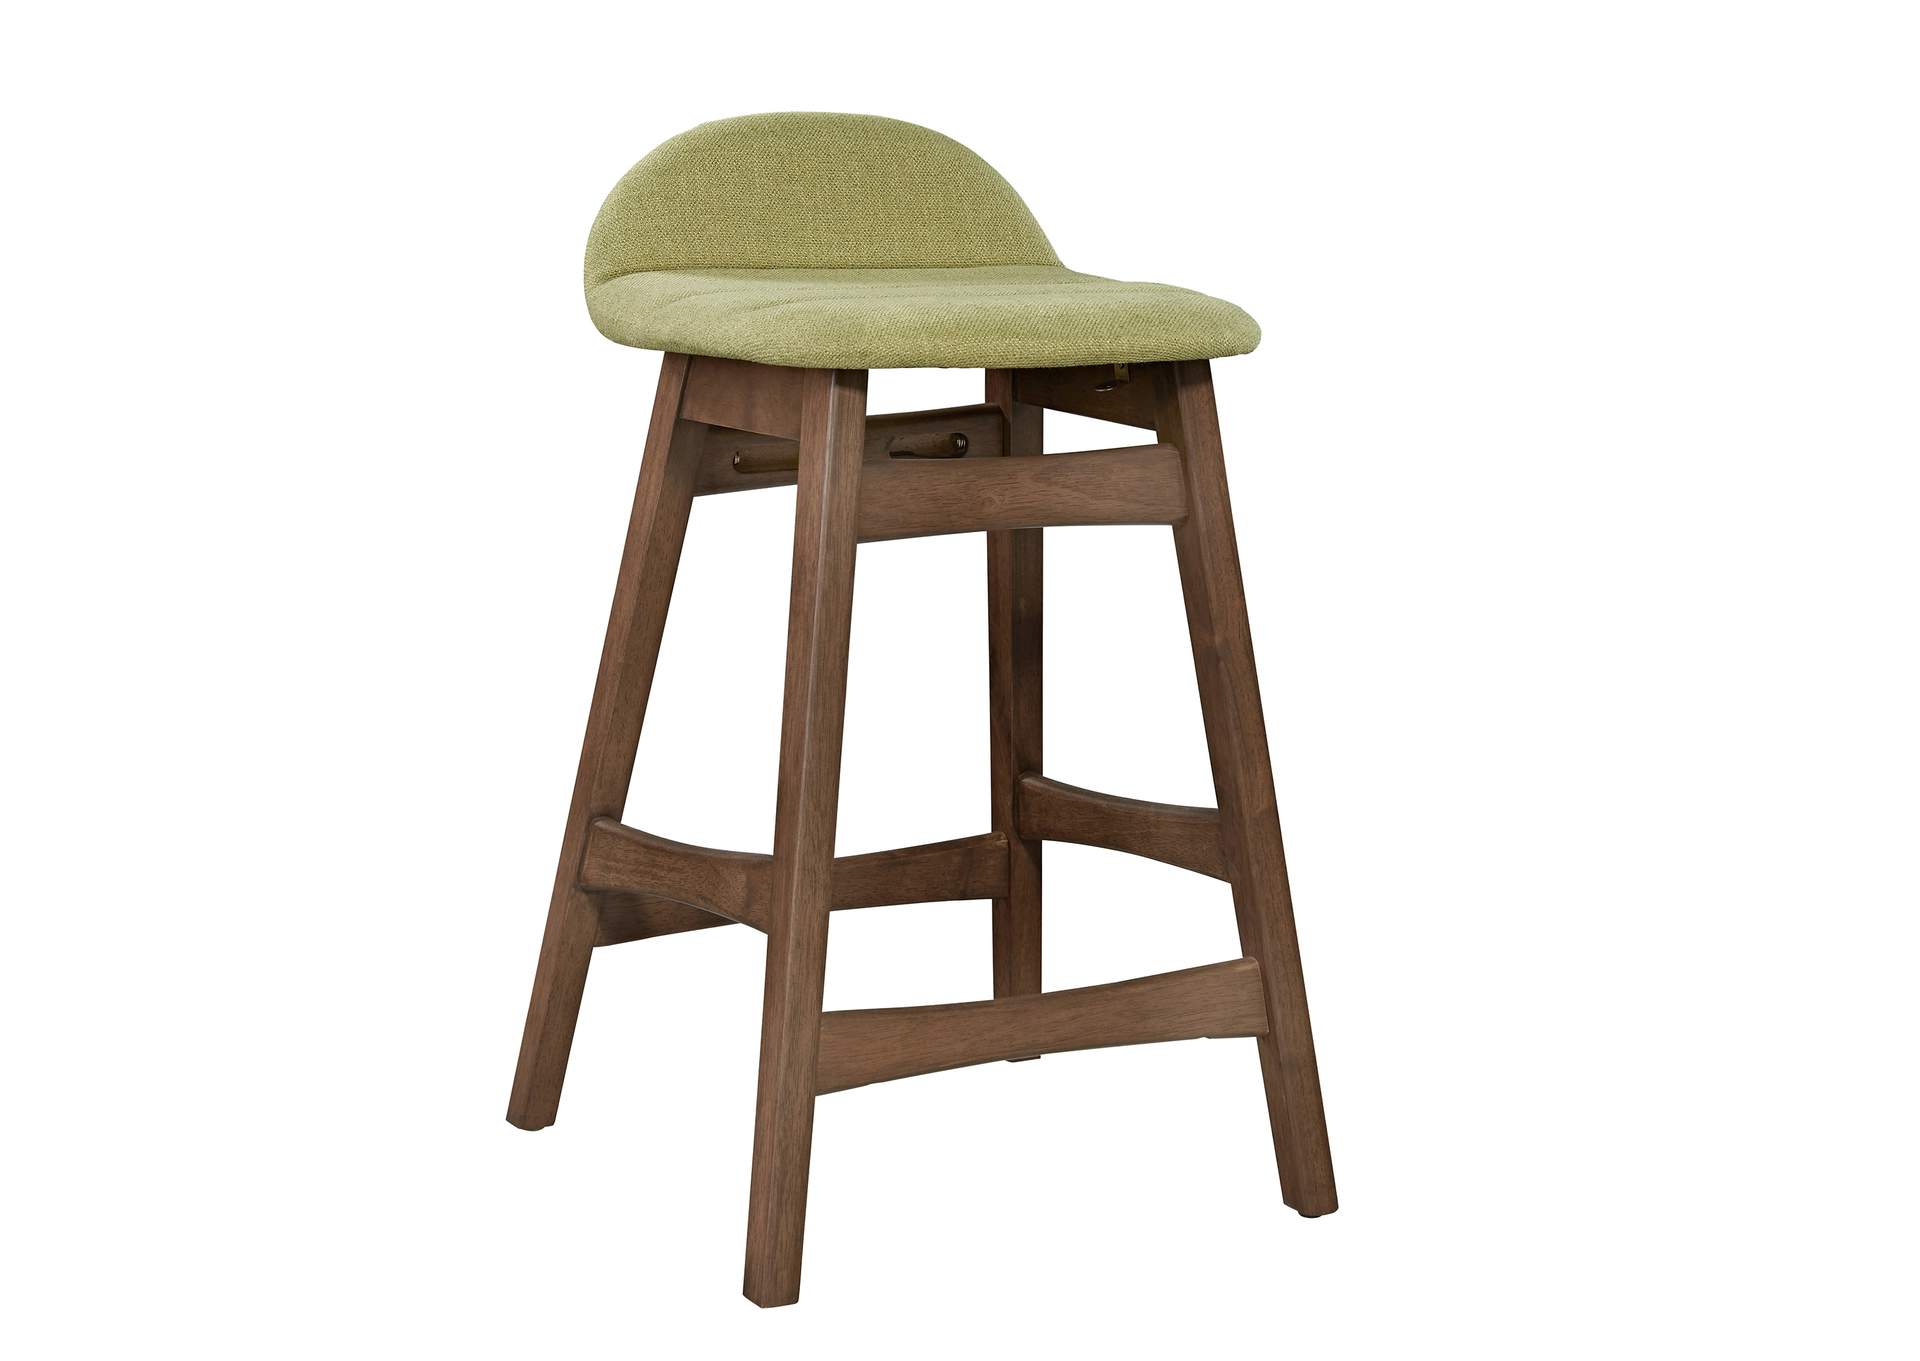 Space Savers 24 Inch Counter Chair - Green (RTA),Liberty